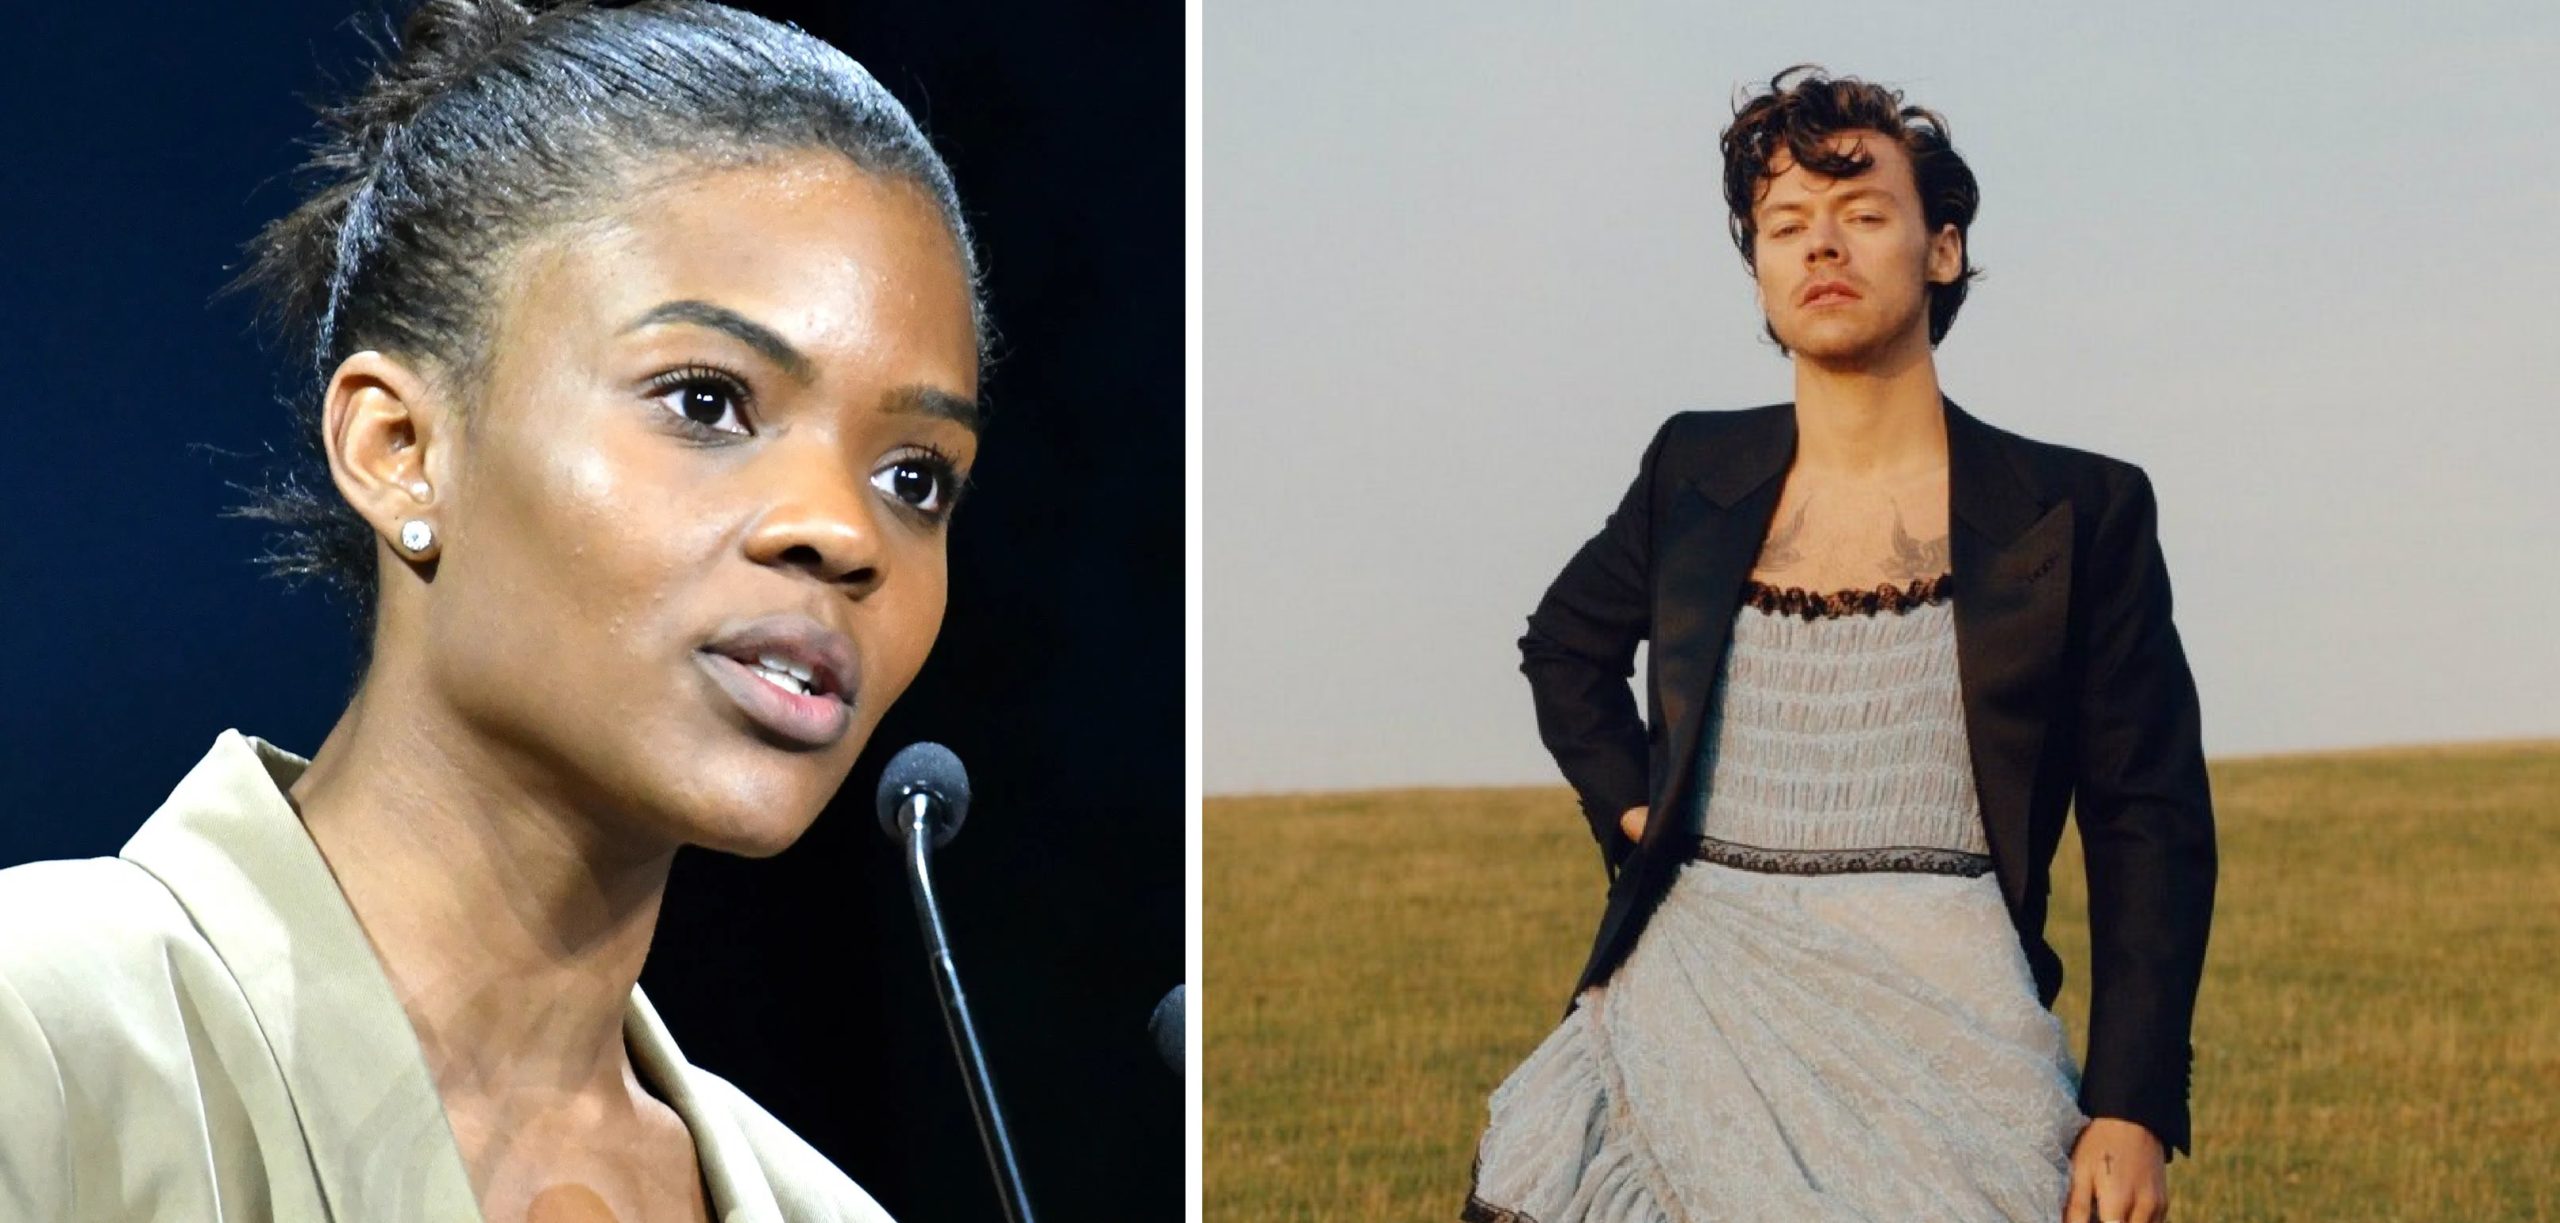 Here’s How Harry Styles Responded To Candace Owens’ Criticism Of His “Dress” on VOGUE Cover